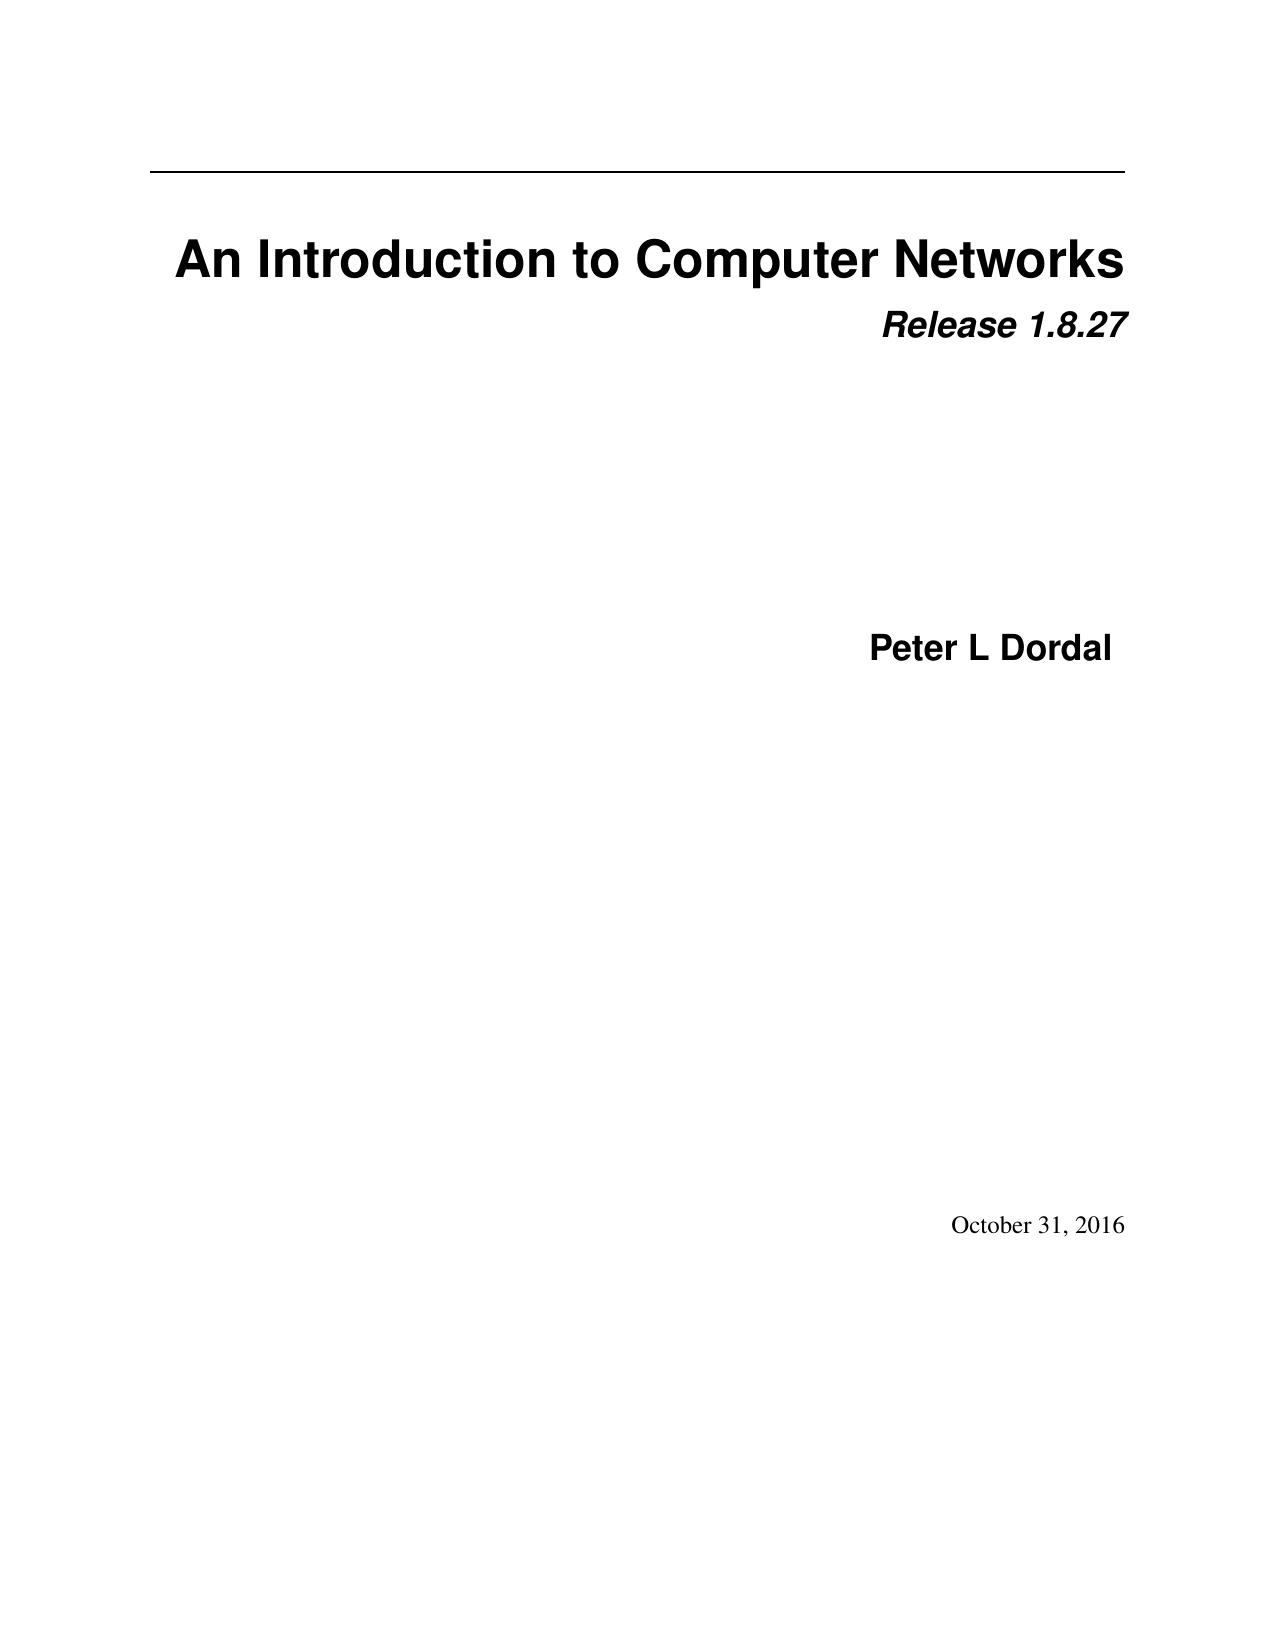 An Introduction Computer Networks